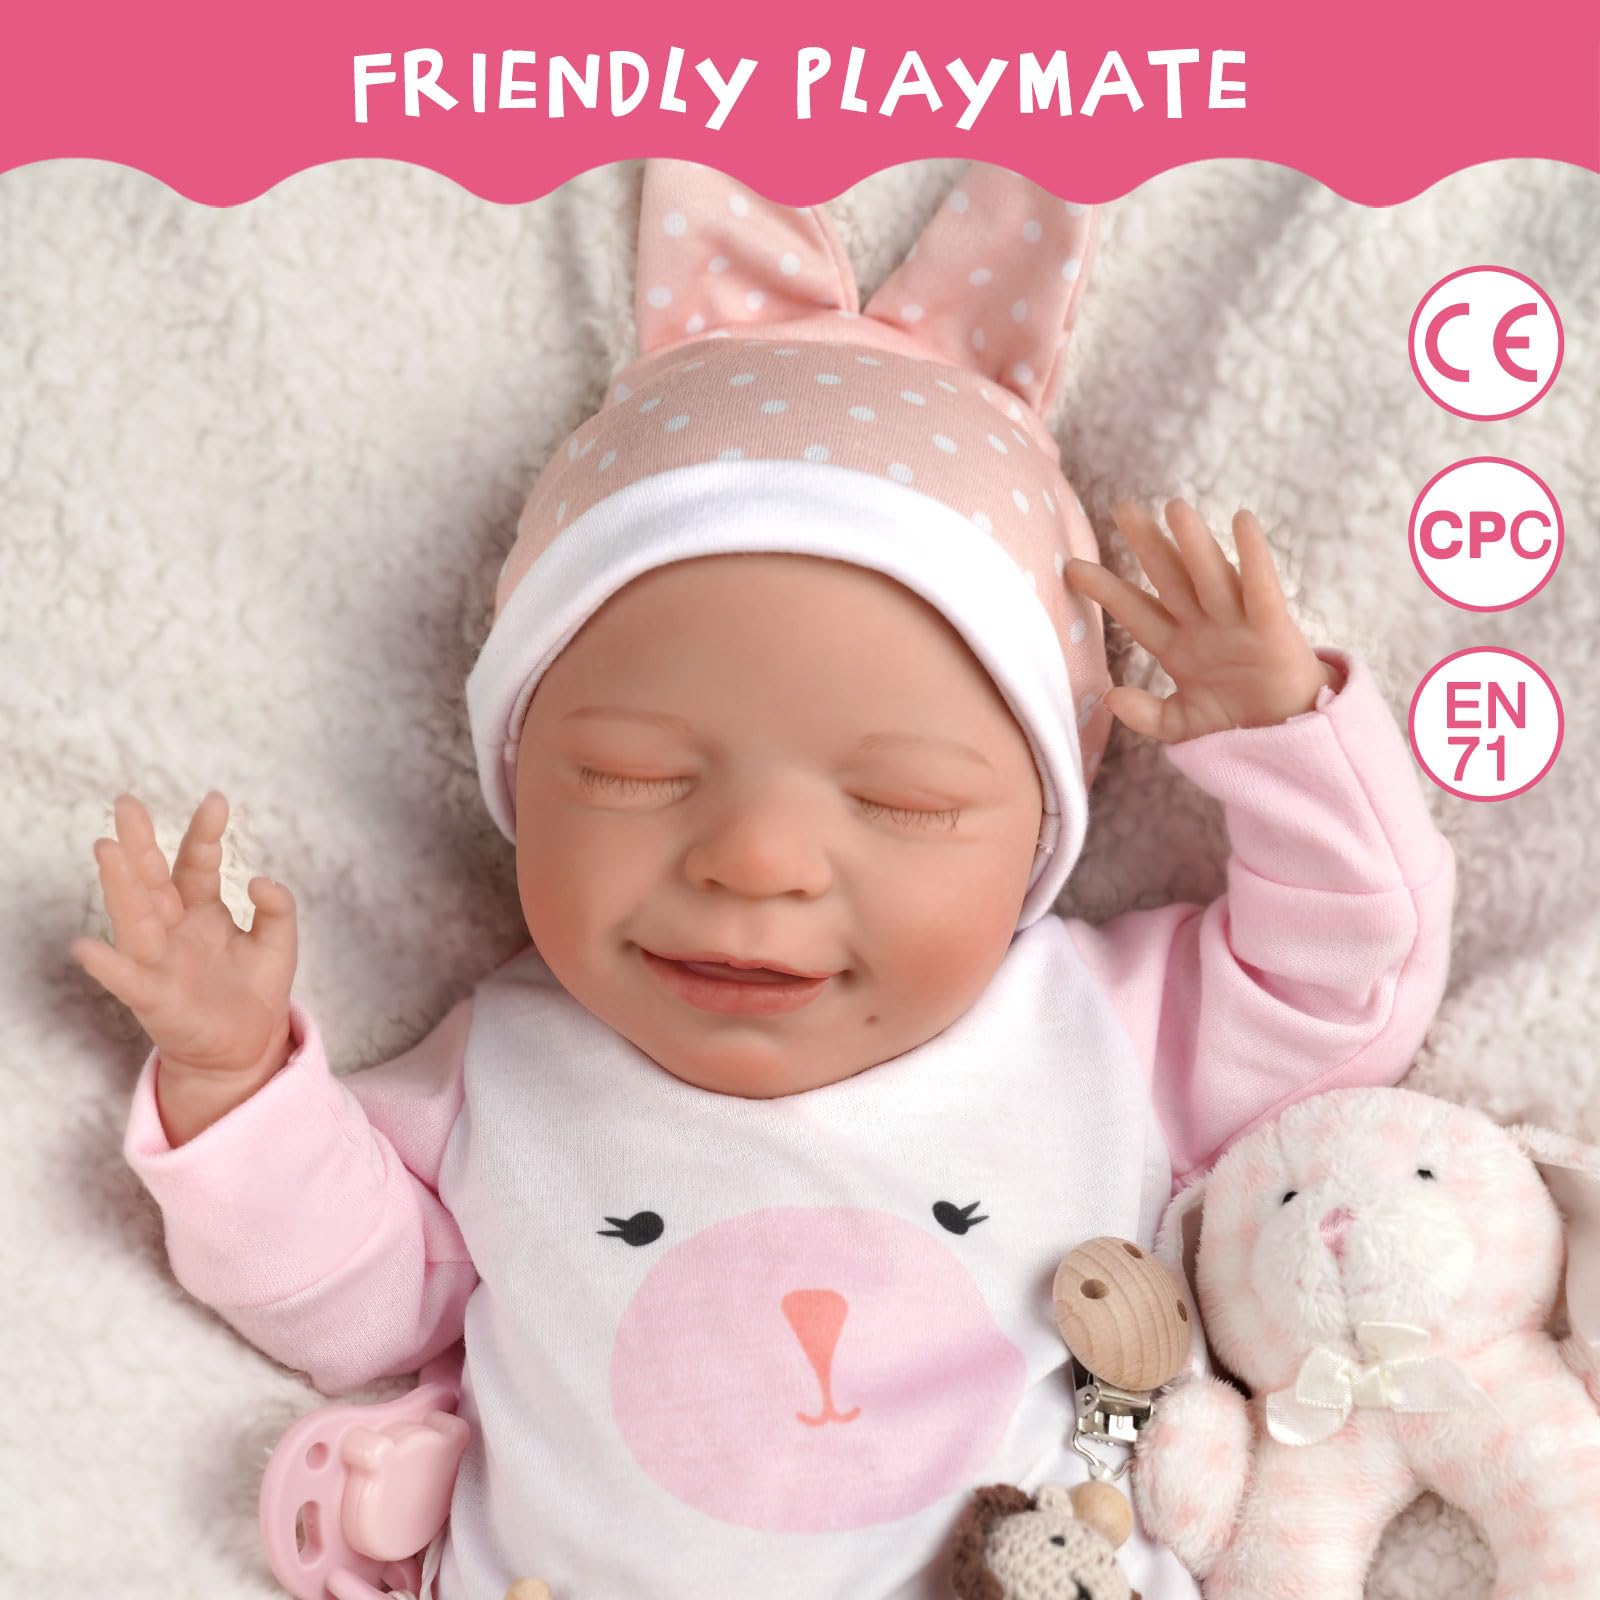 BABESIDE Lifelike Reborn Baby Dolls - 20-Inch Sweet Smile Real Life Realistic-Newborn Full Body Vinyl Sleeping Baby Girl with Toy Accessories Gift Set for Kids Age 3+